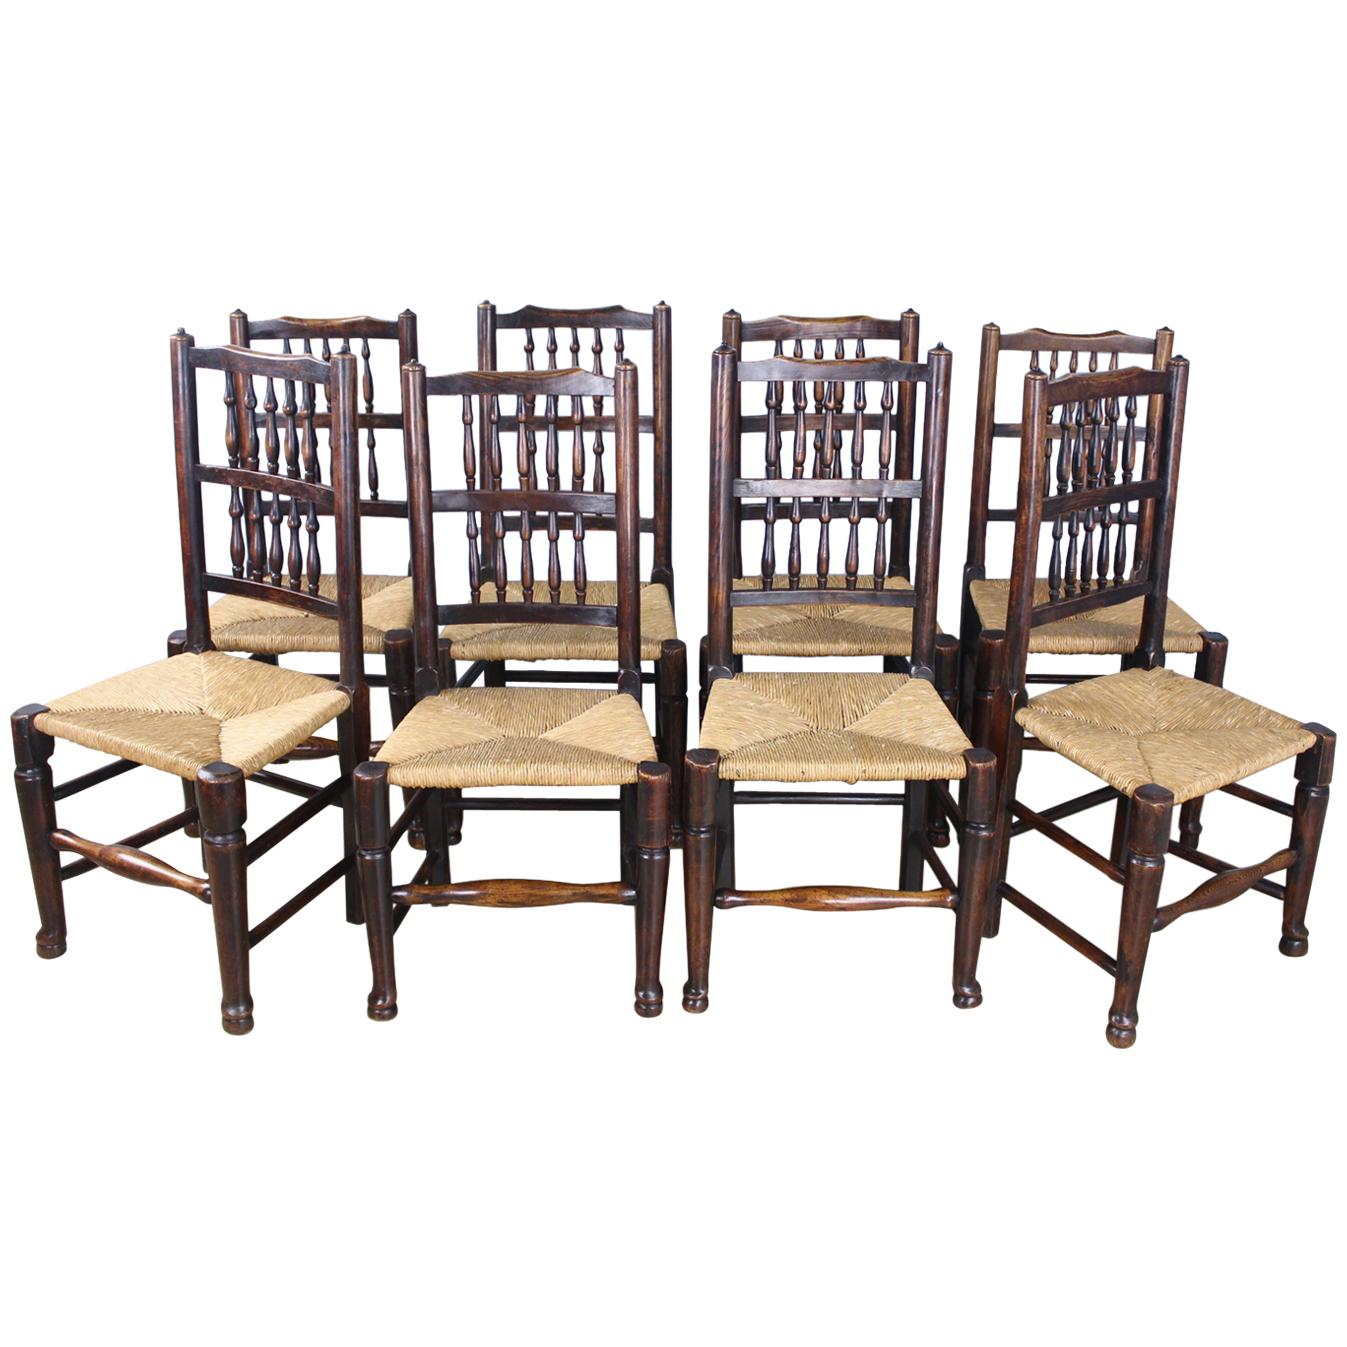 Collection of Eight Early 19th Century Ash and Elm Lancashire Spindleback Chairs